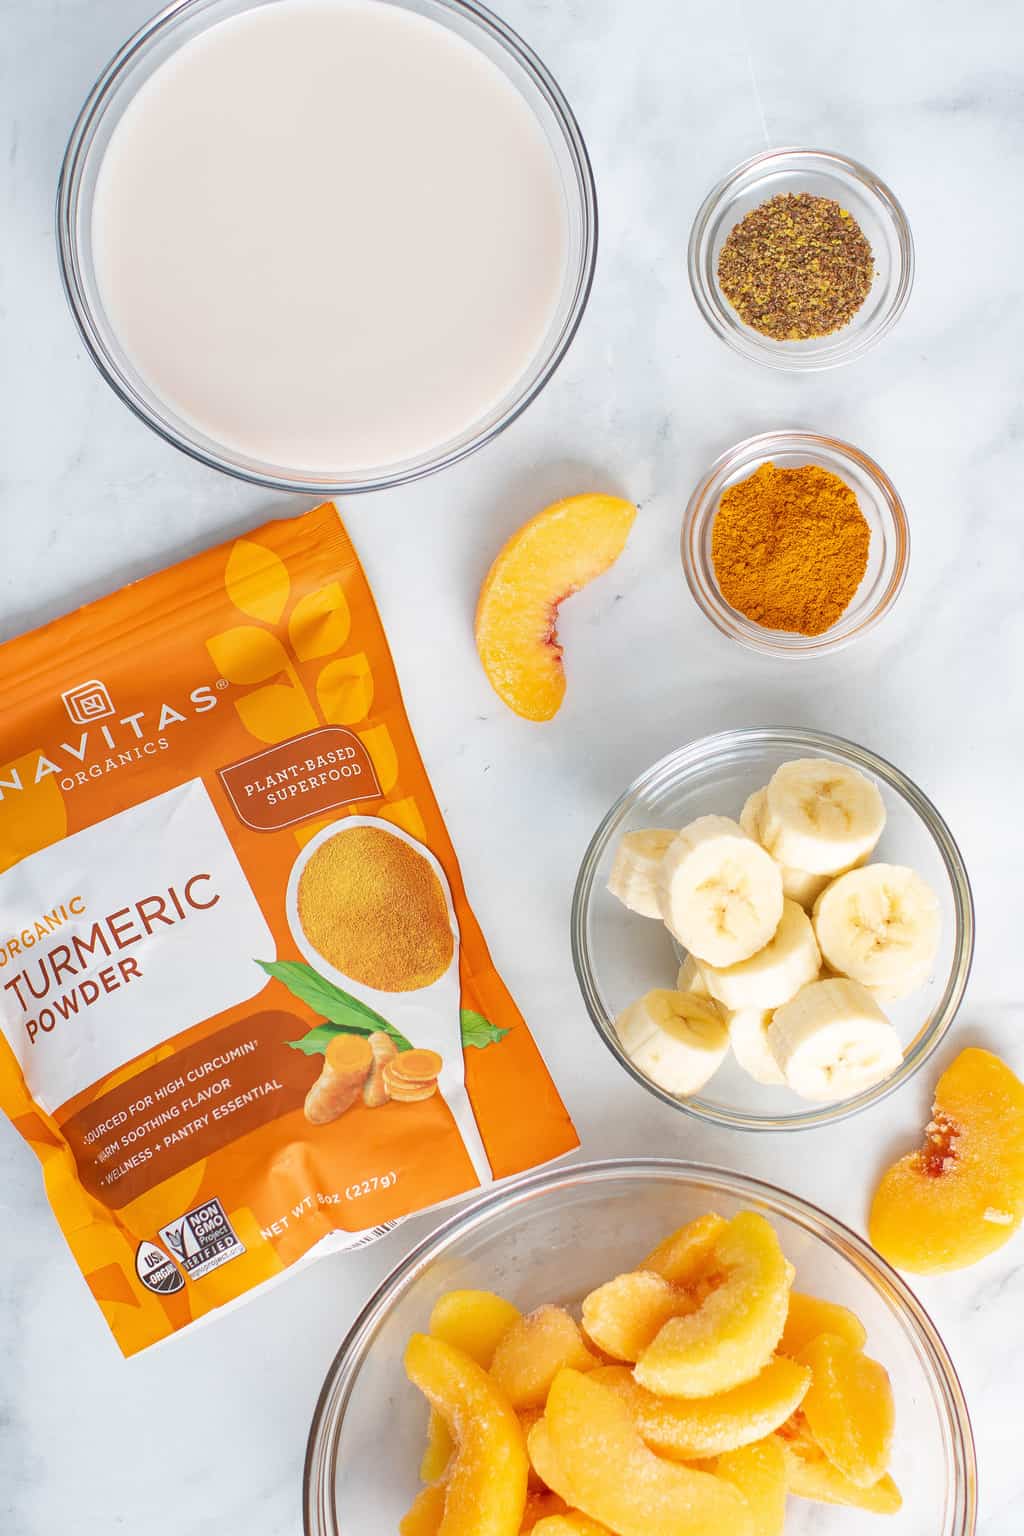 Ingredients including Navitas organic turmeric powder, sliced bananas, and frozen peaches.